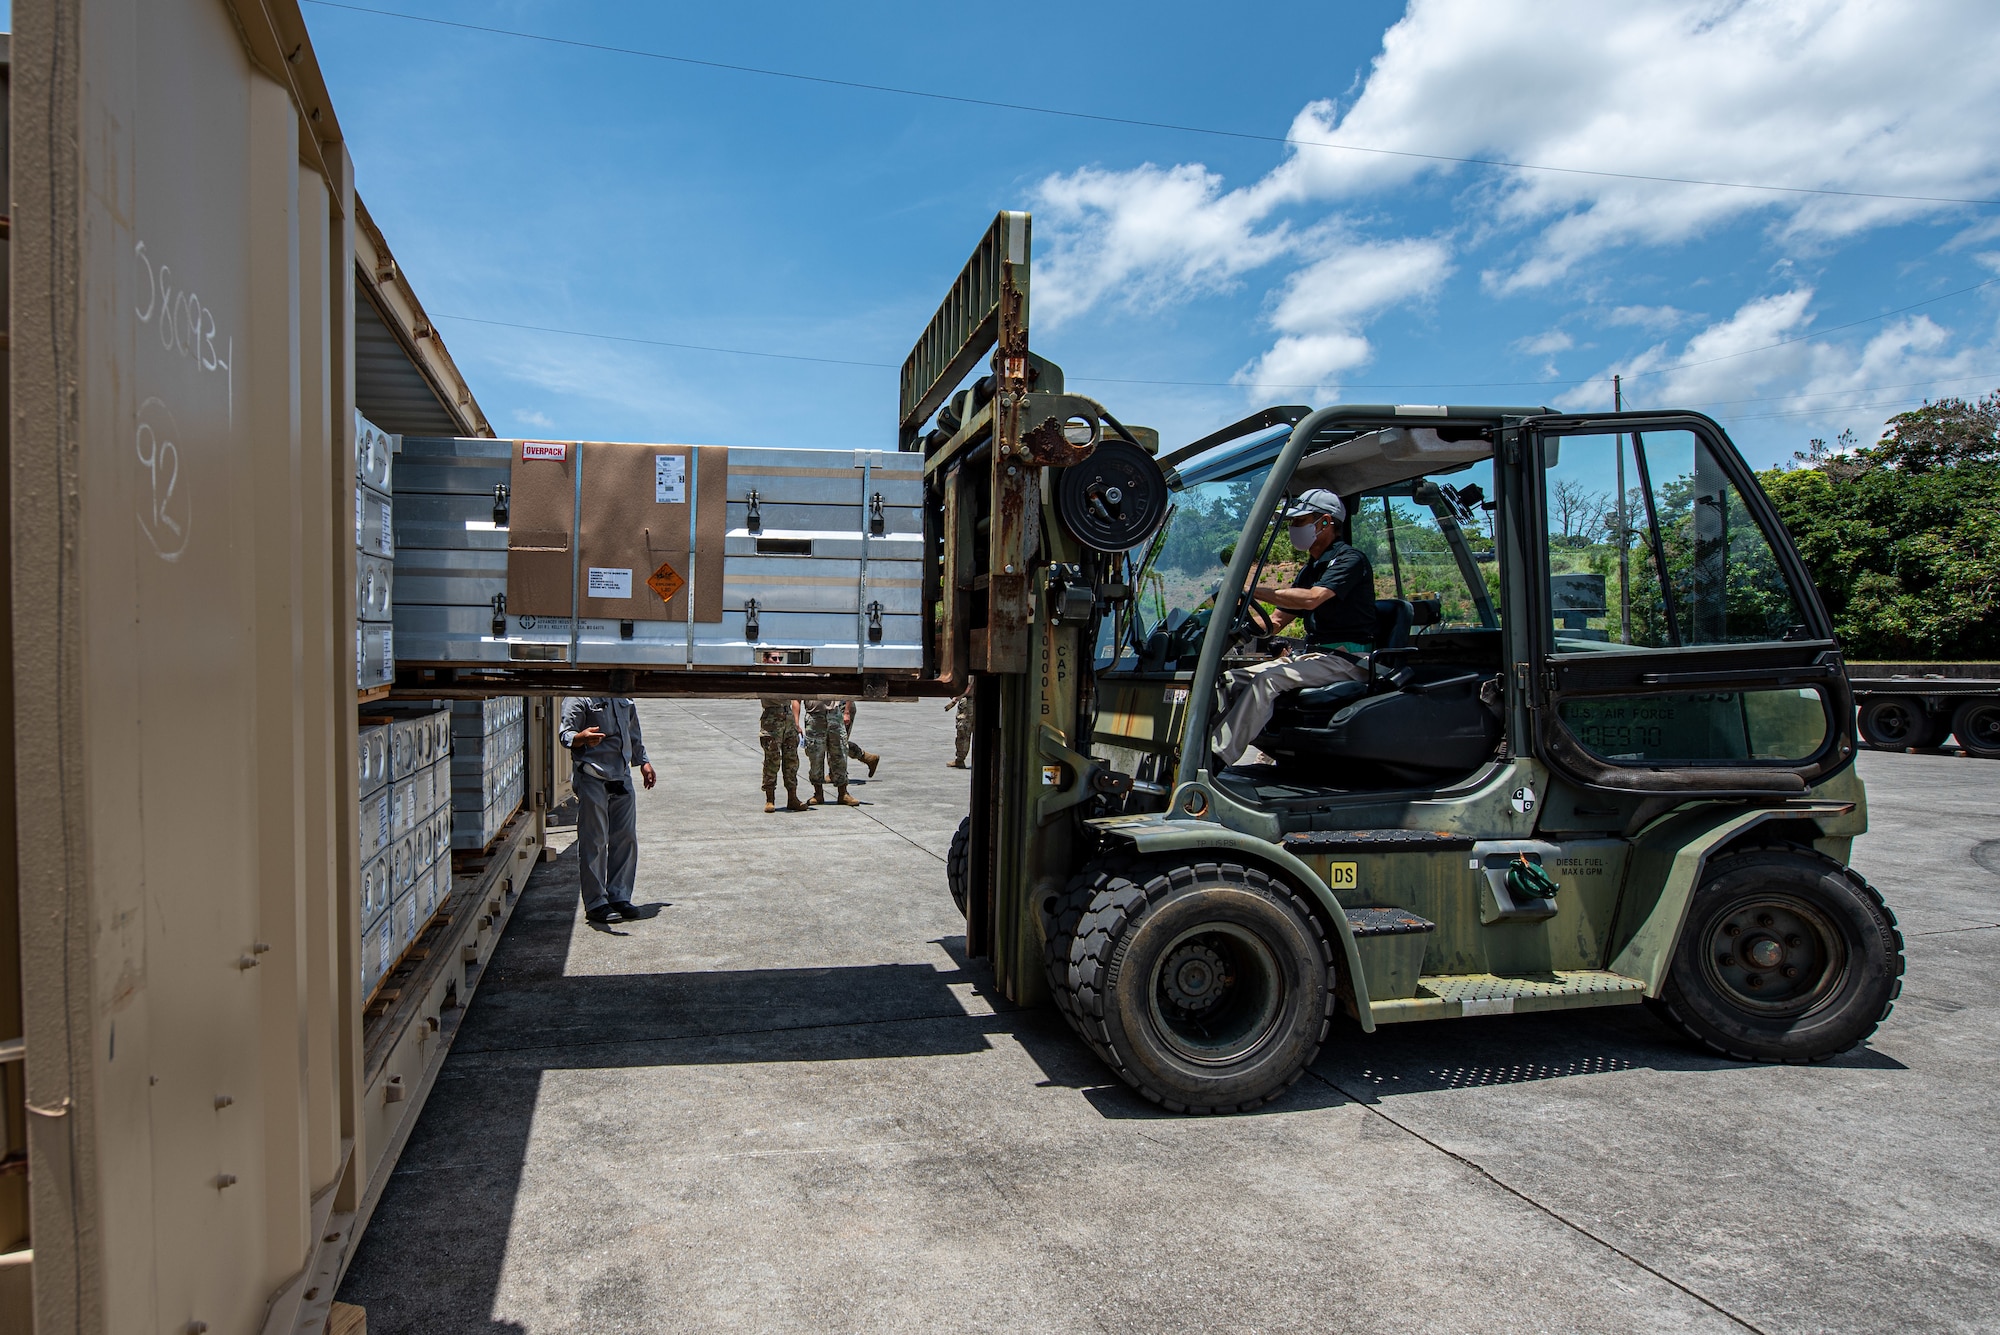 A forklift operator lifts munitions.